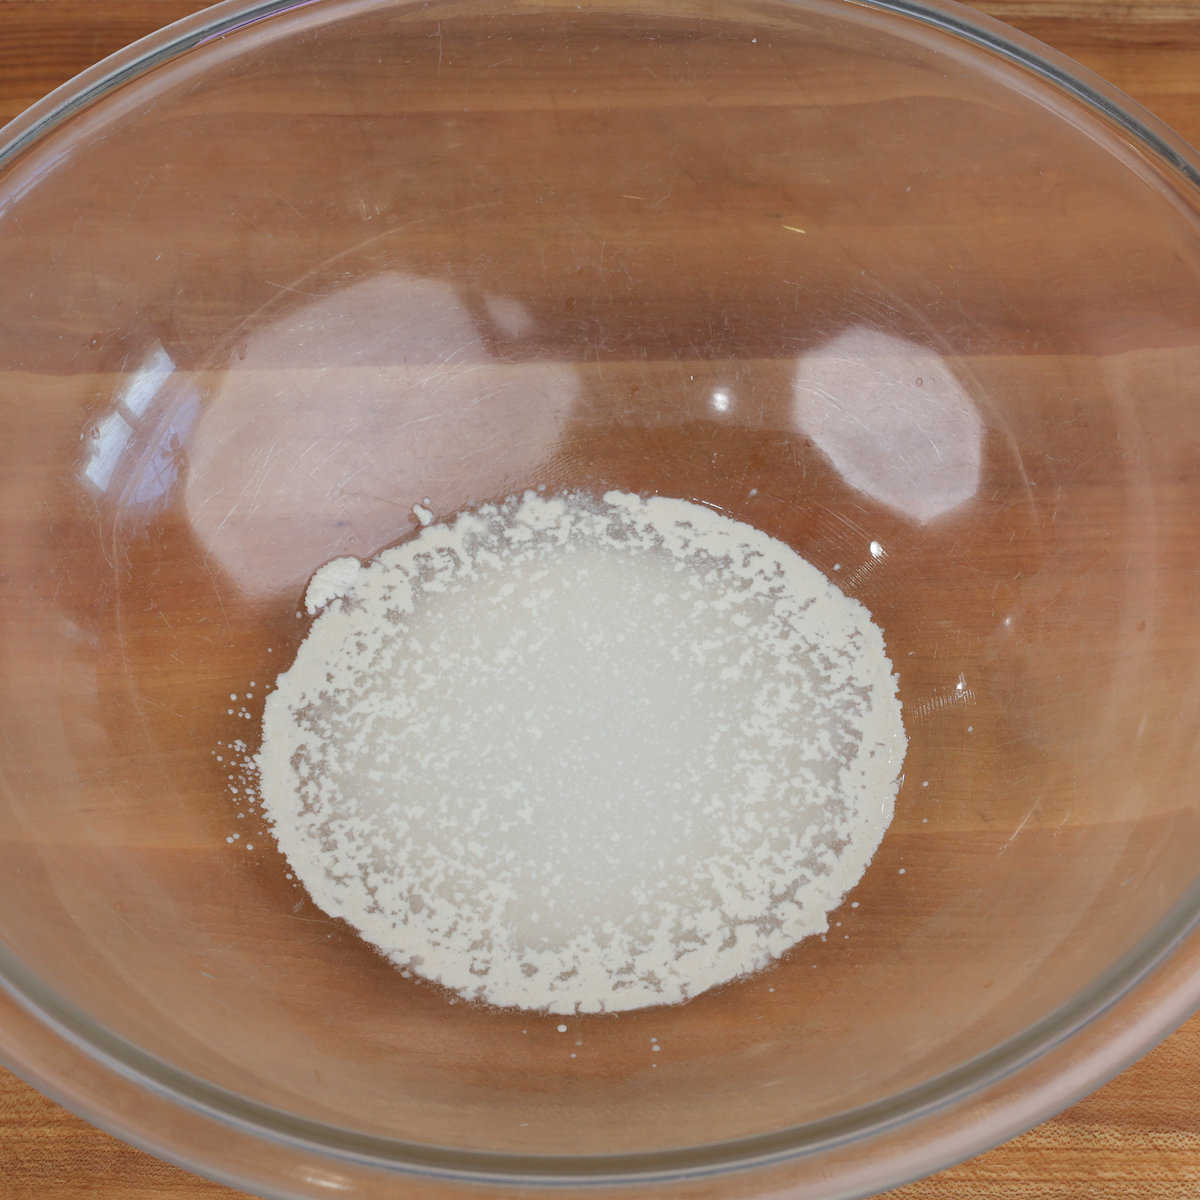 yeast dissolving in water in a large bowl.